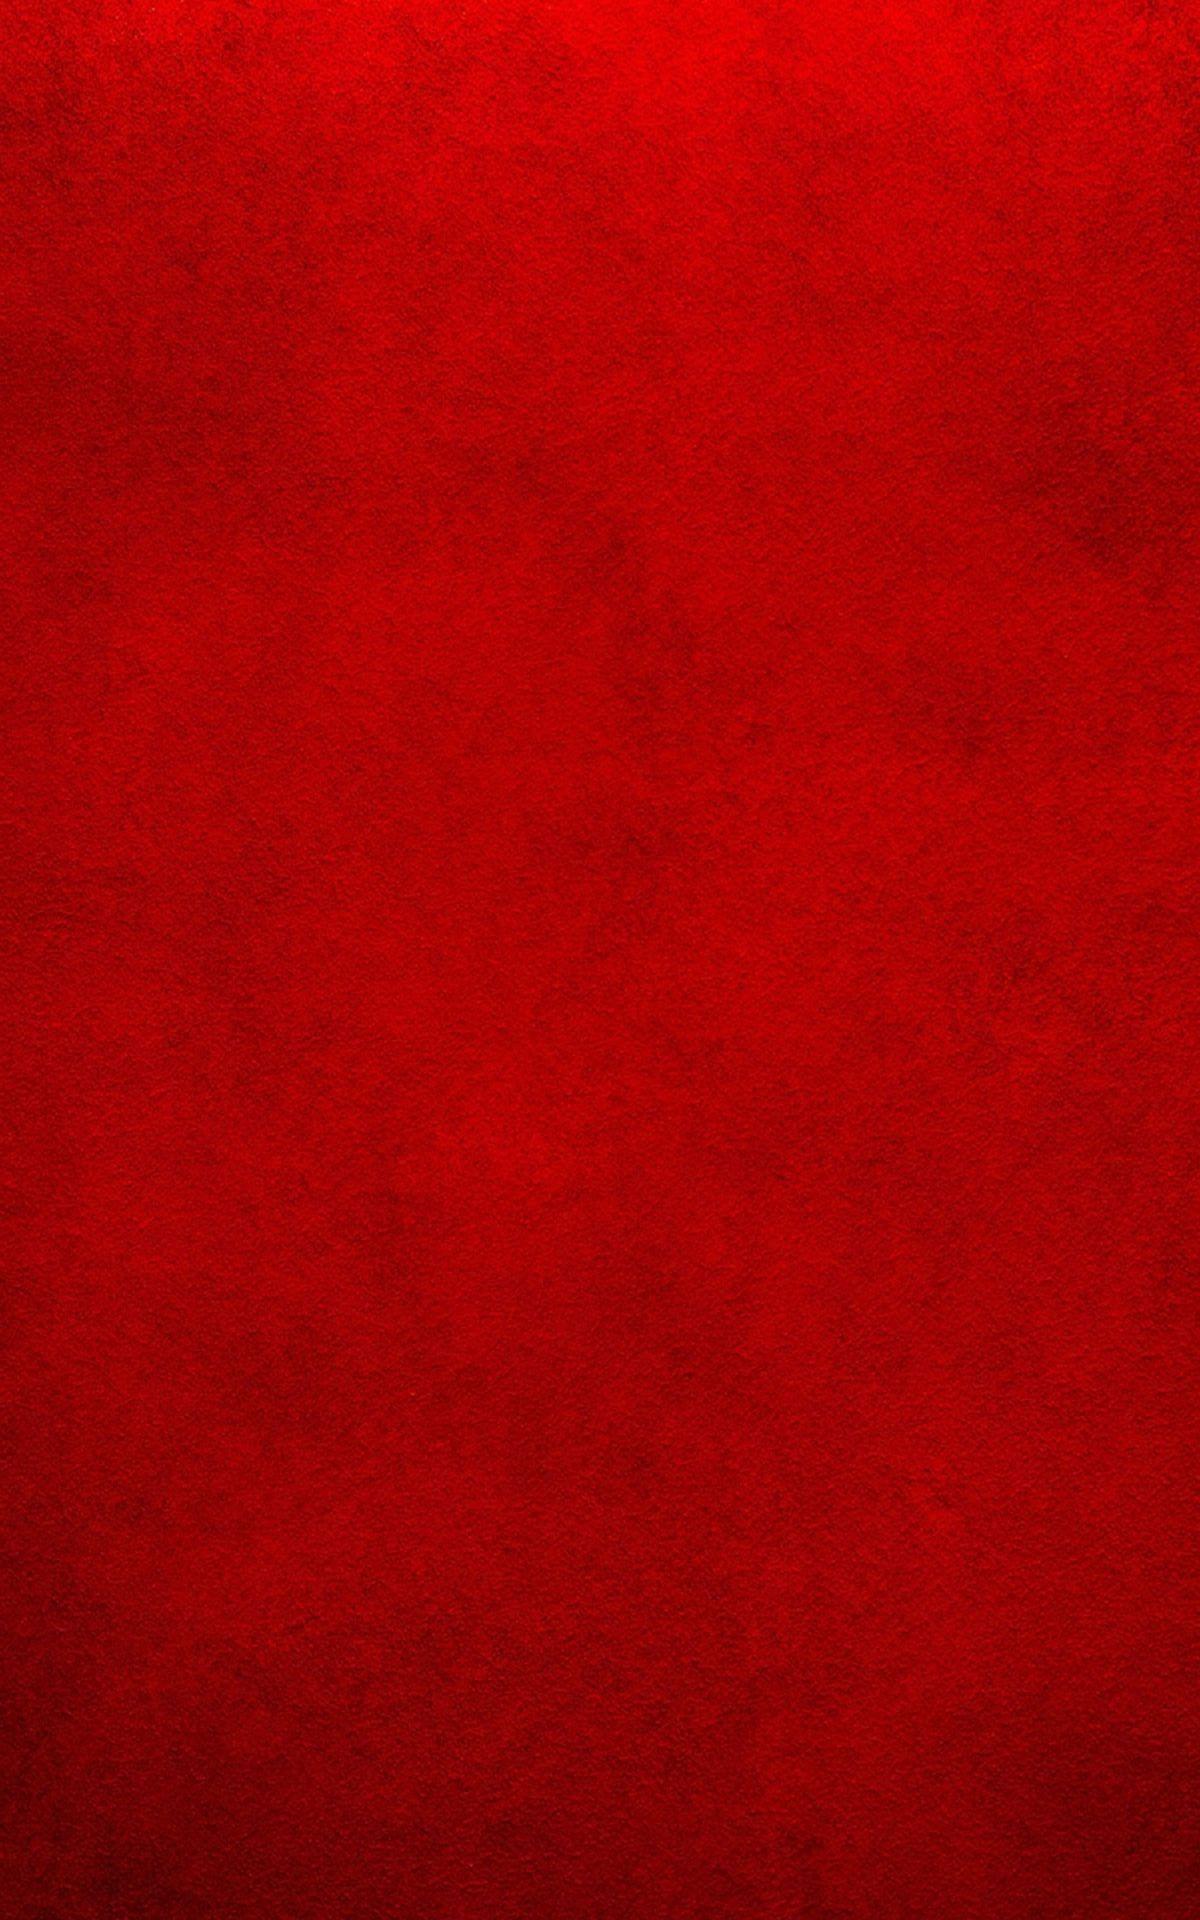 Ideas For High Resolution Star Wars Empire Logo Wallpaper image. Red colour wallpaper, iPhone red wallpaper, Color wallpaper iphone